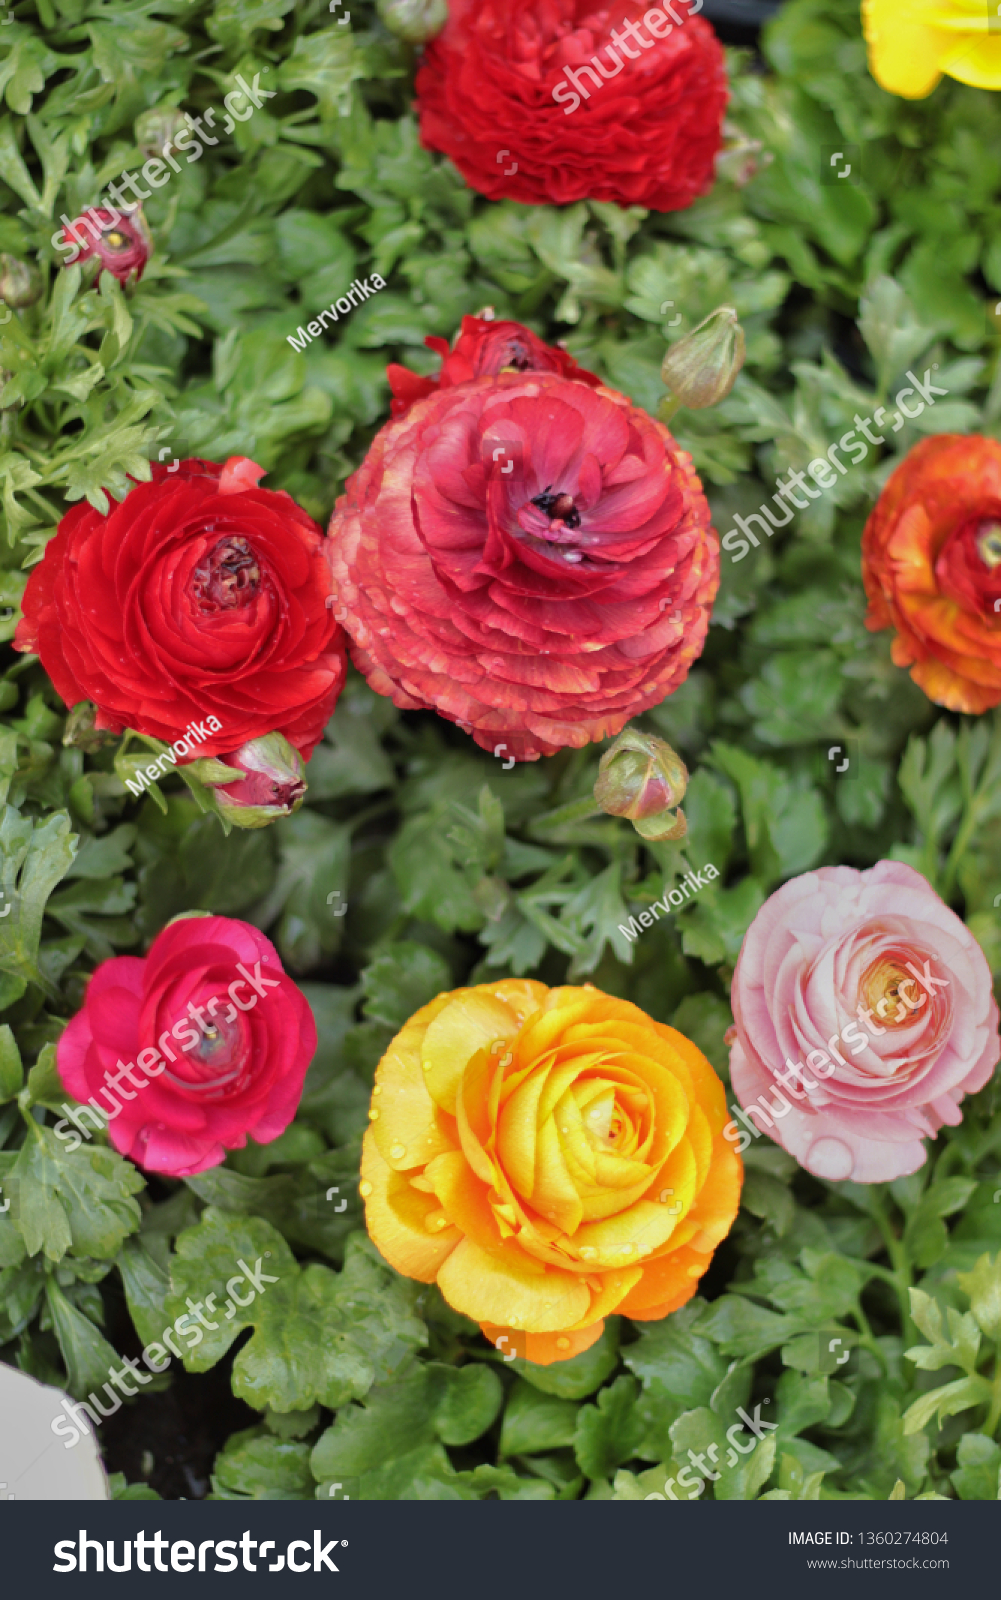 Colorful roses, red rose and yellow rose and orange rose and pink rose. #1360274804